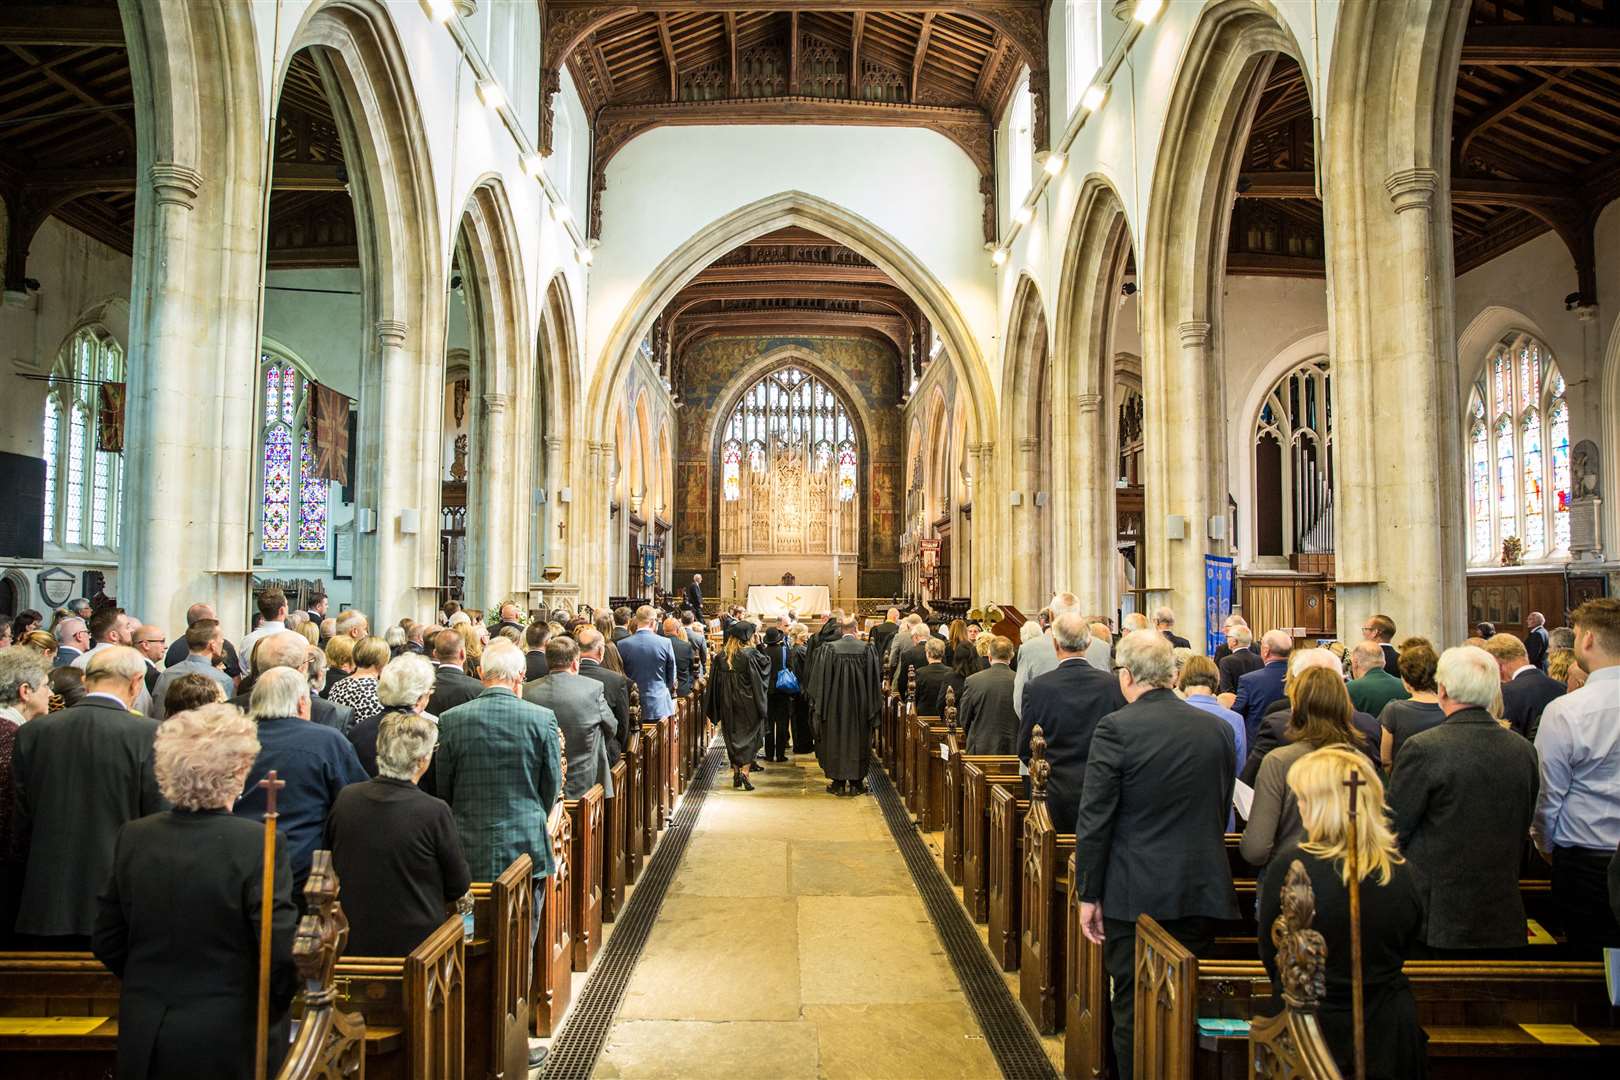 More than 100 mourners came to pay their respects to Brian Mortimer at All Saints' Church